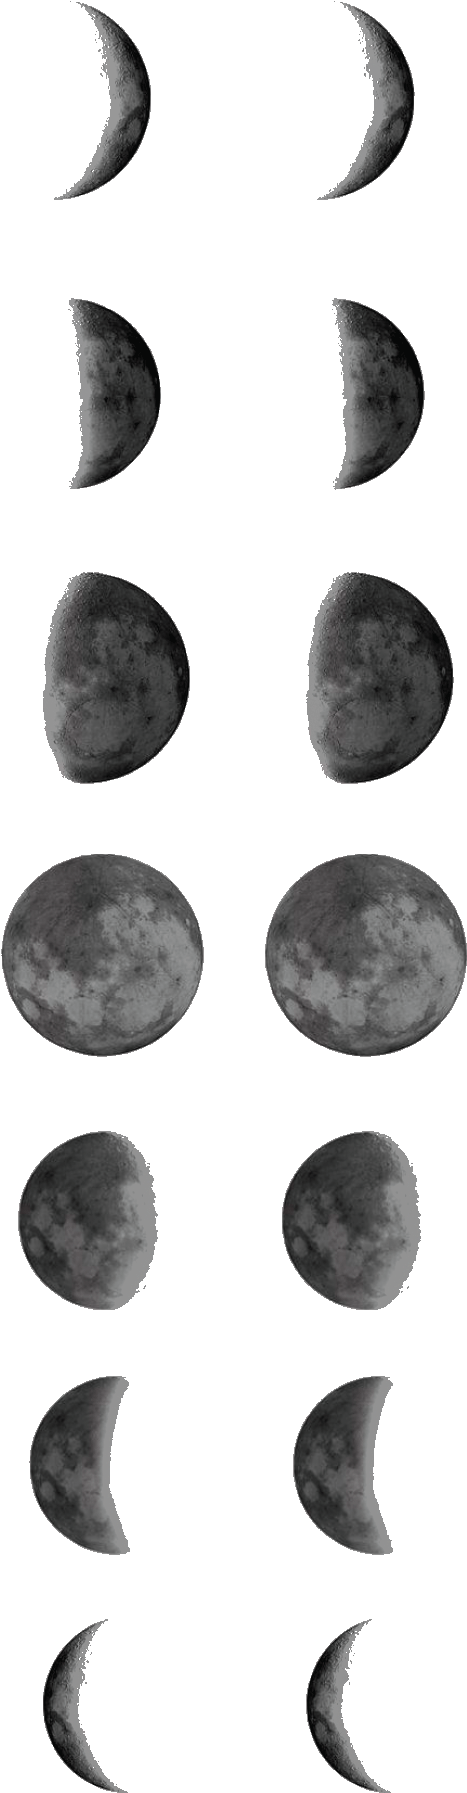 A Group Of Images Of The Moon